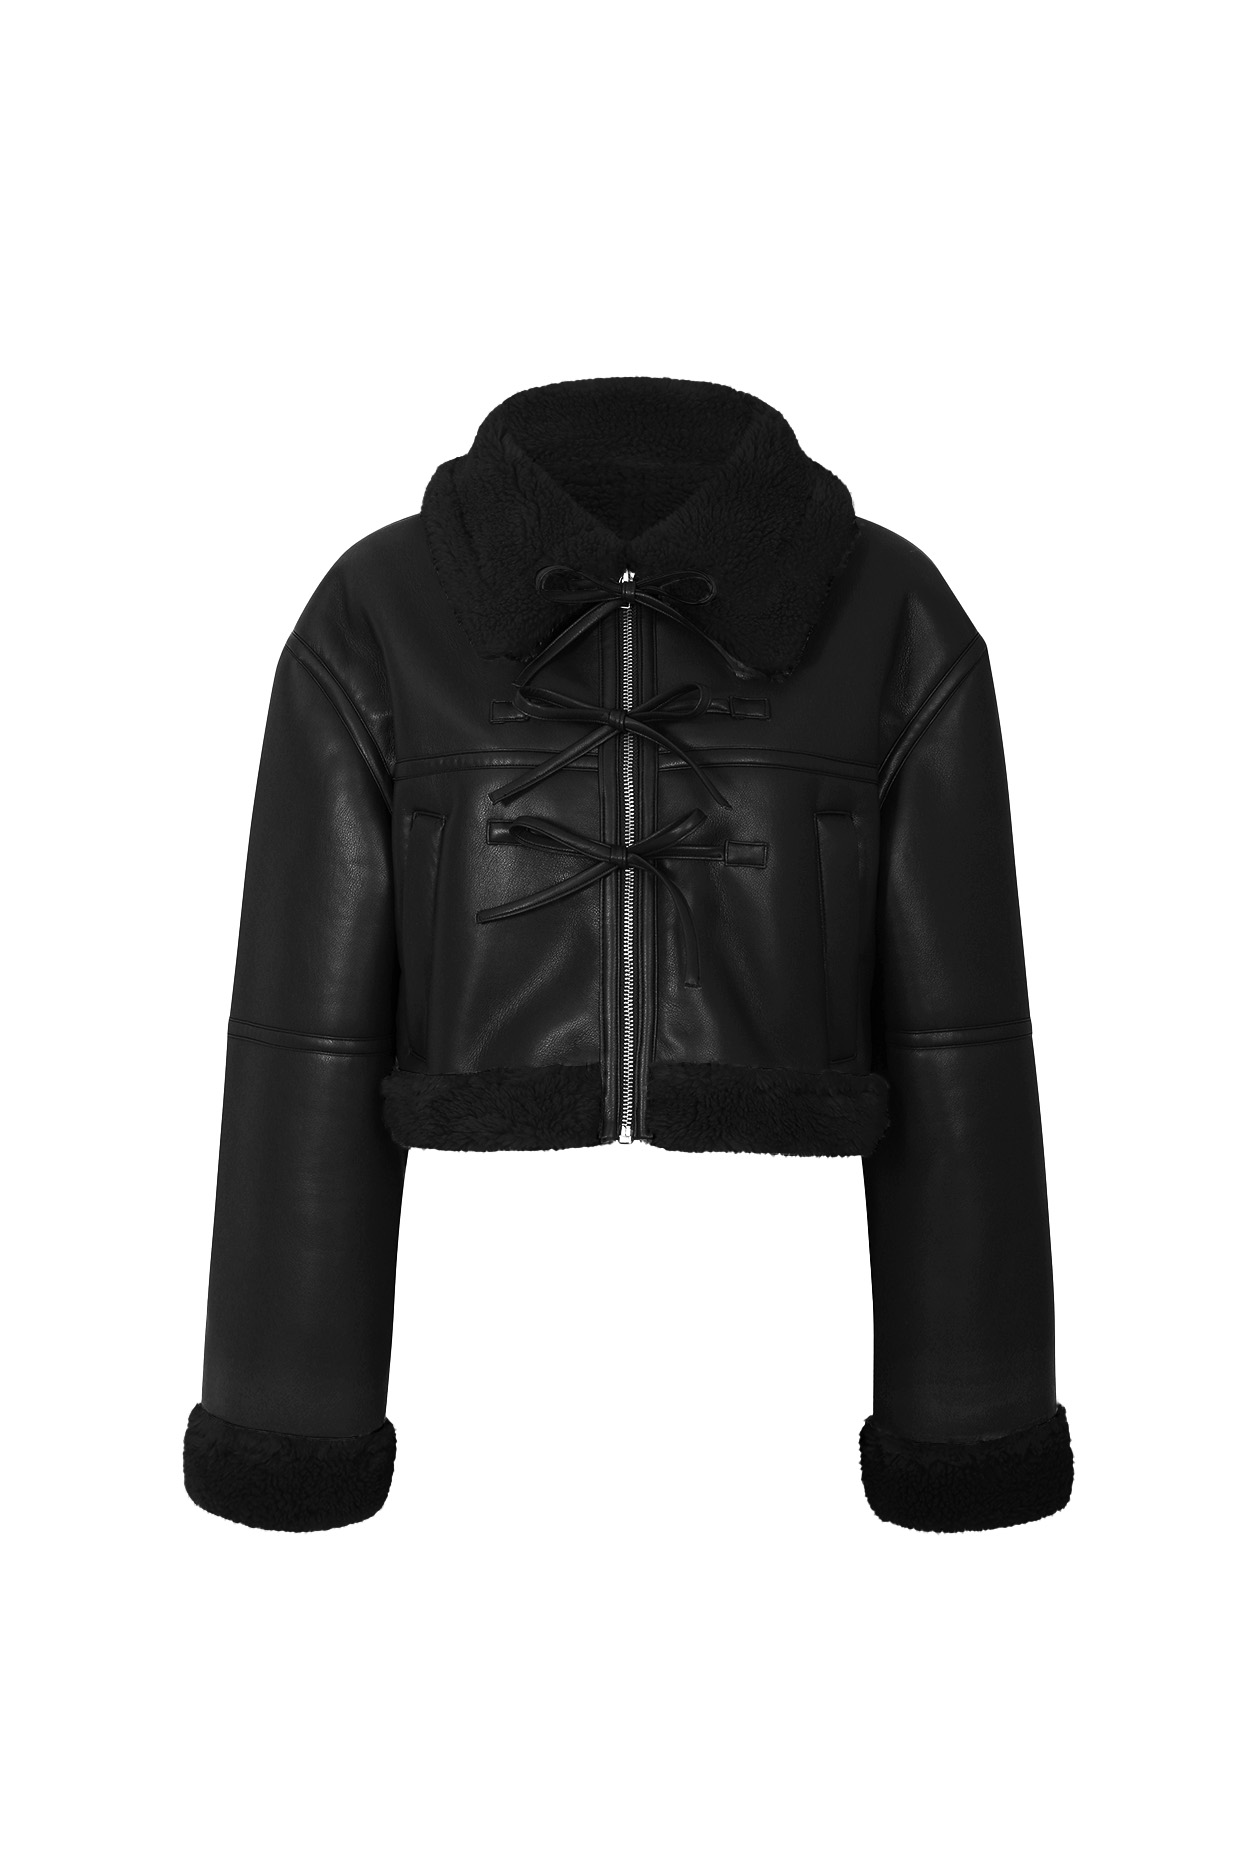 LUCY MUSTANG JACKET black